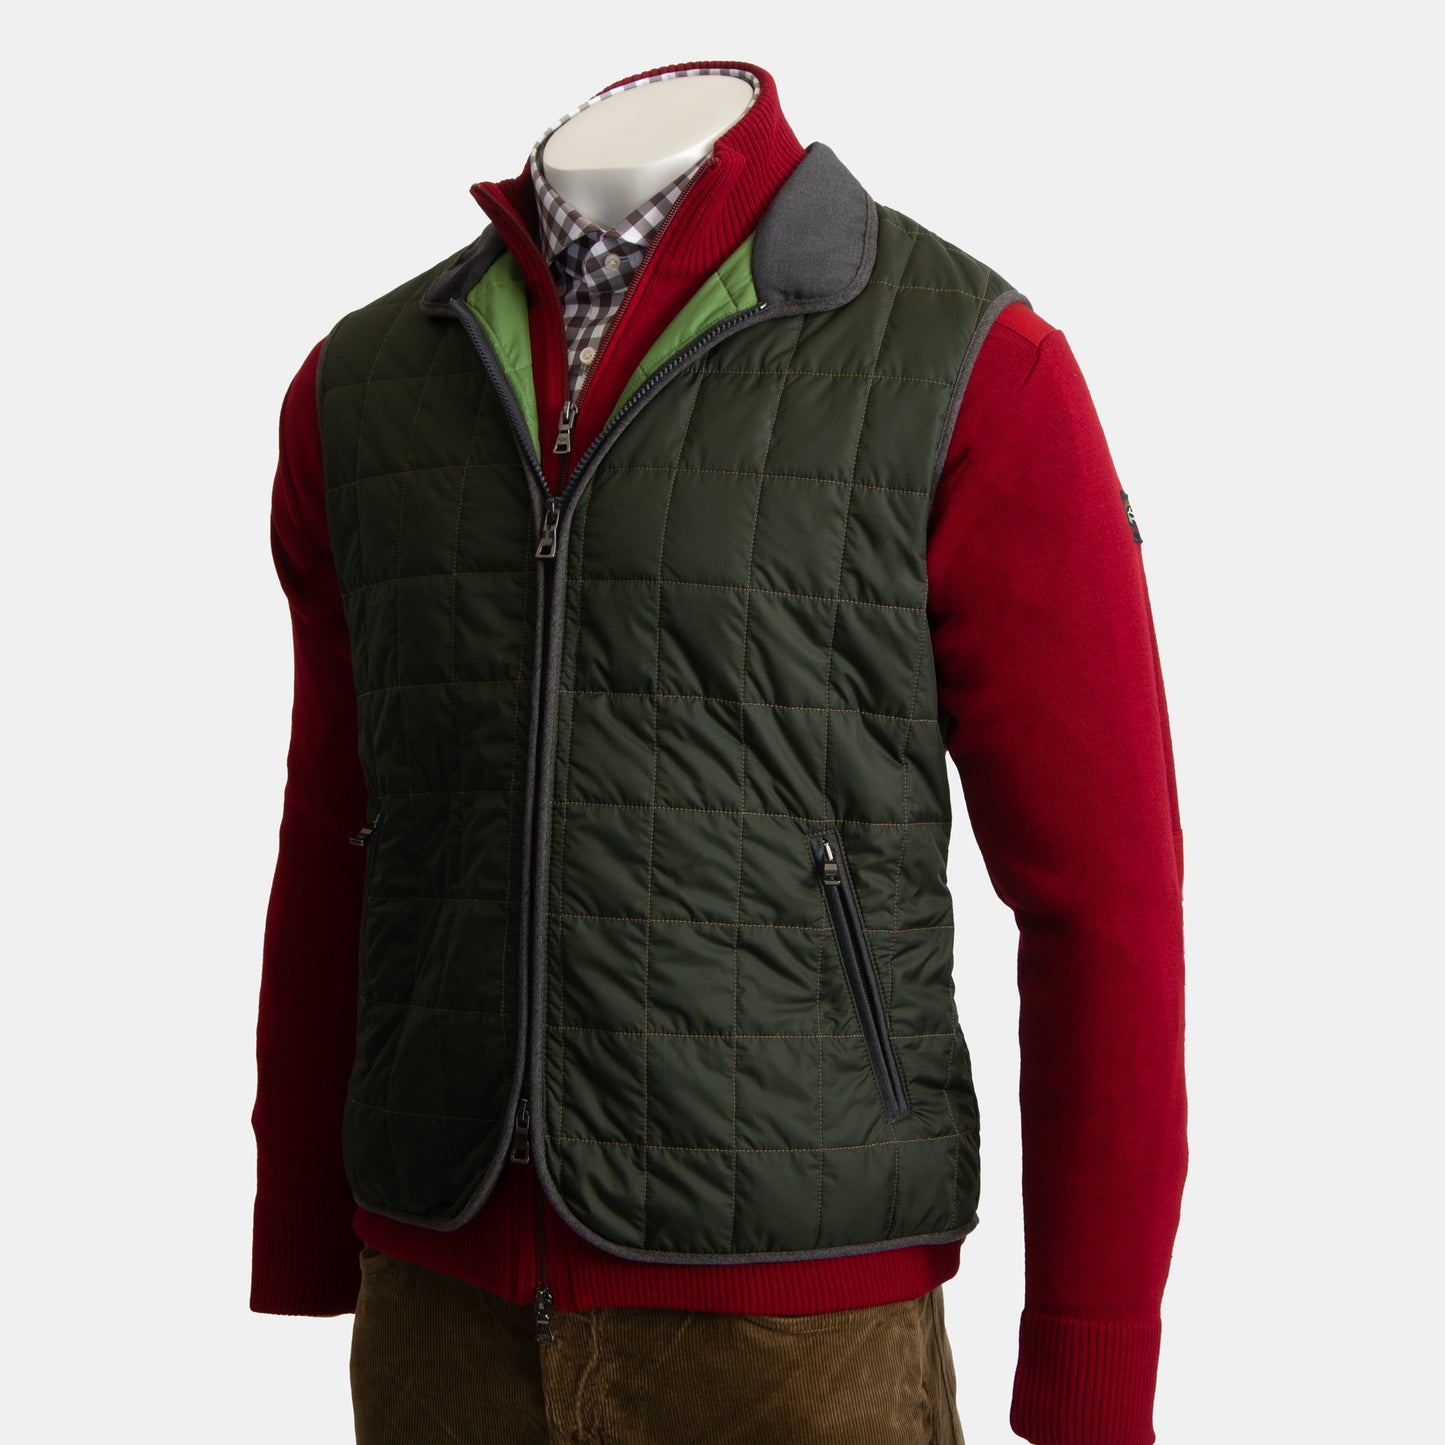 Khaki’s of Carmel - Olive Quilted Vest